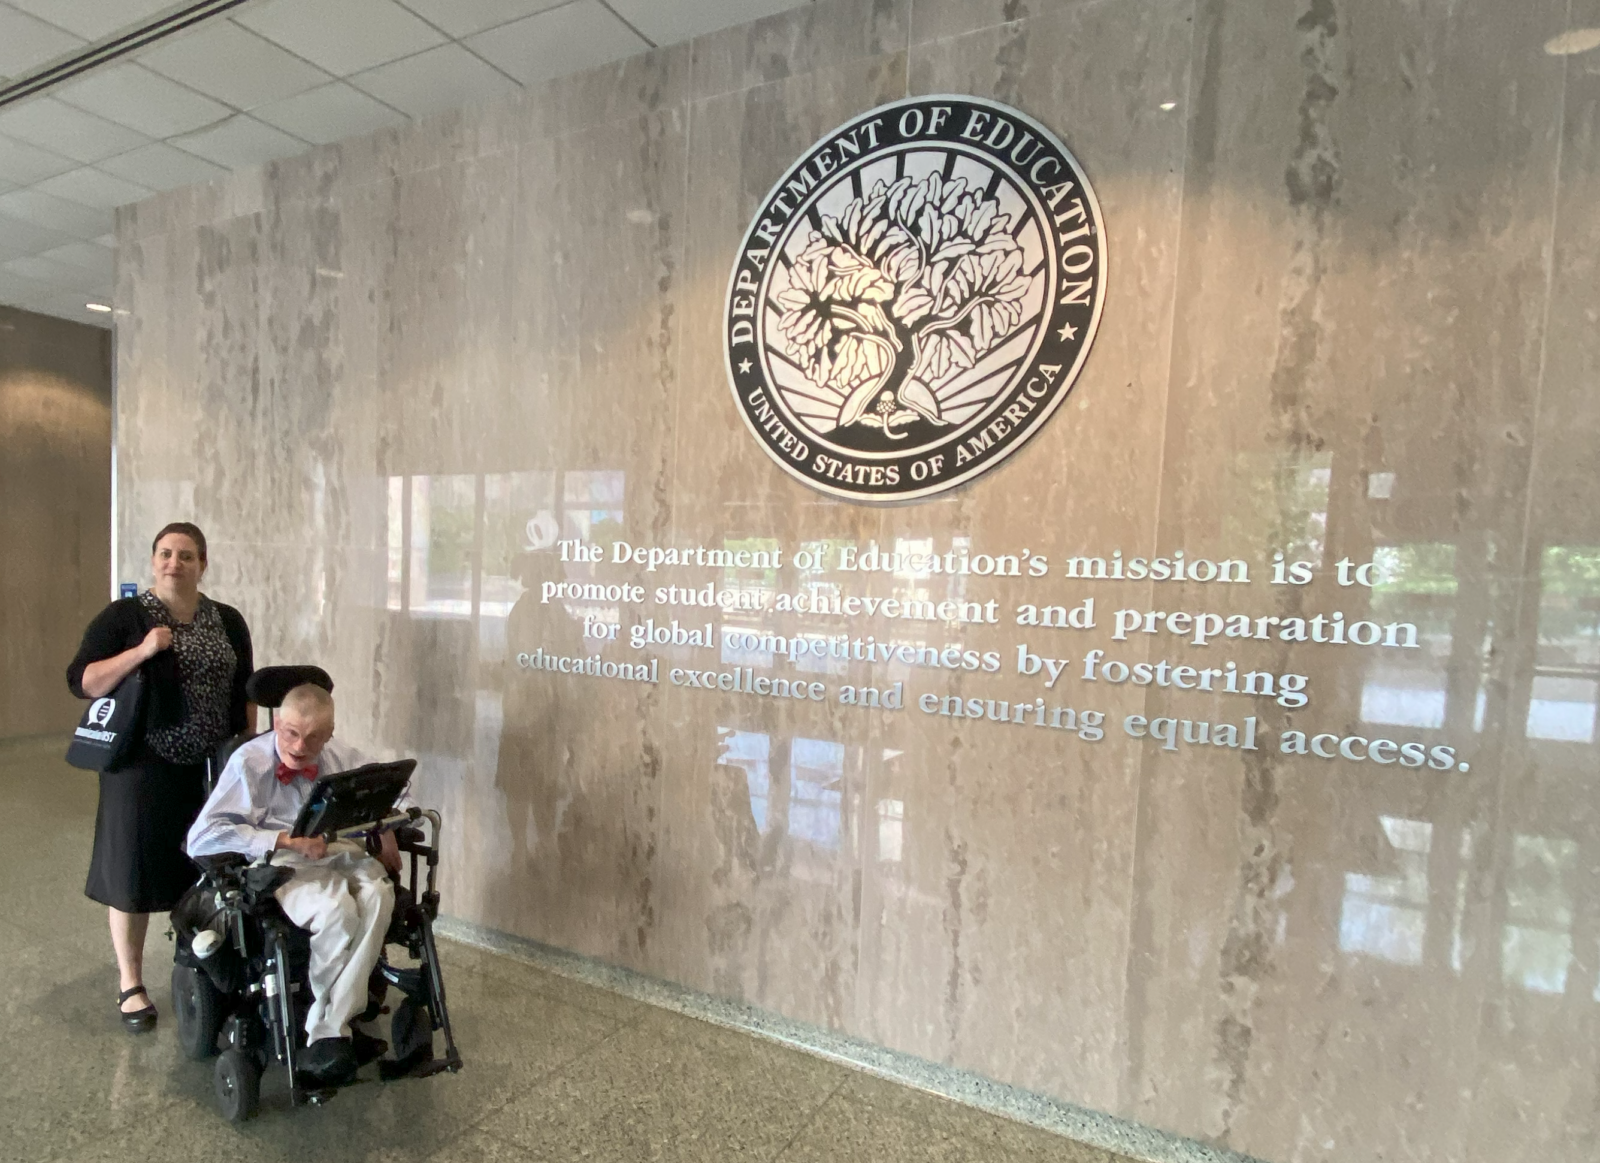 CommunicationFIRST Executive Director Tauna Szymanski and Policy Director Bob Williams in front of the U.S. Department of Education (ED) seal. The seal is located in the lobby of the U.S. Department of Education building and hangs on a wall of marble. The words, “The Department of Education’s mission is to promote student achievement and preparation for global competitiveness by fostering educational excellence and ensuring equal access” are below the seal. Bob is a smiling white man with white hair and a mustache wearing glasses and a bowtie with a button-down shirt and khaki pants, sitting in a motorized wheelchair with an AAC device in front of him. Tauna is a smiling white woman with brown hair. She is standing behind Bob and is wearing black and holding a black bag with the CommunicationFIRST logo on it in white.